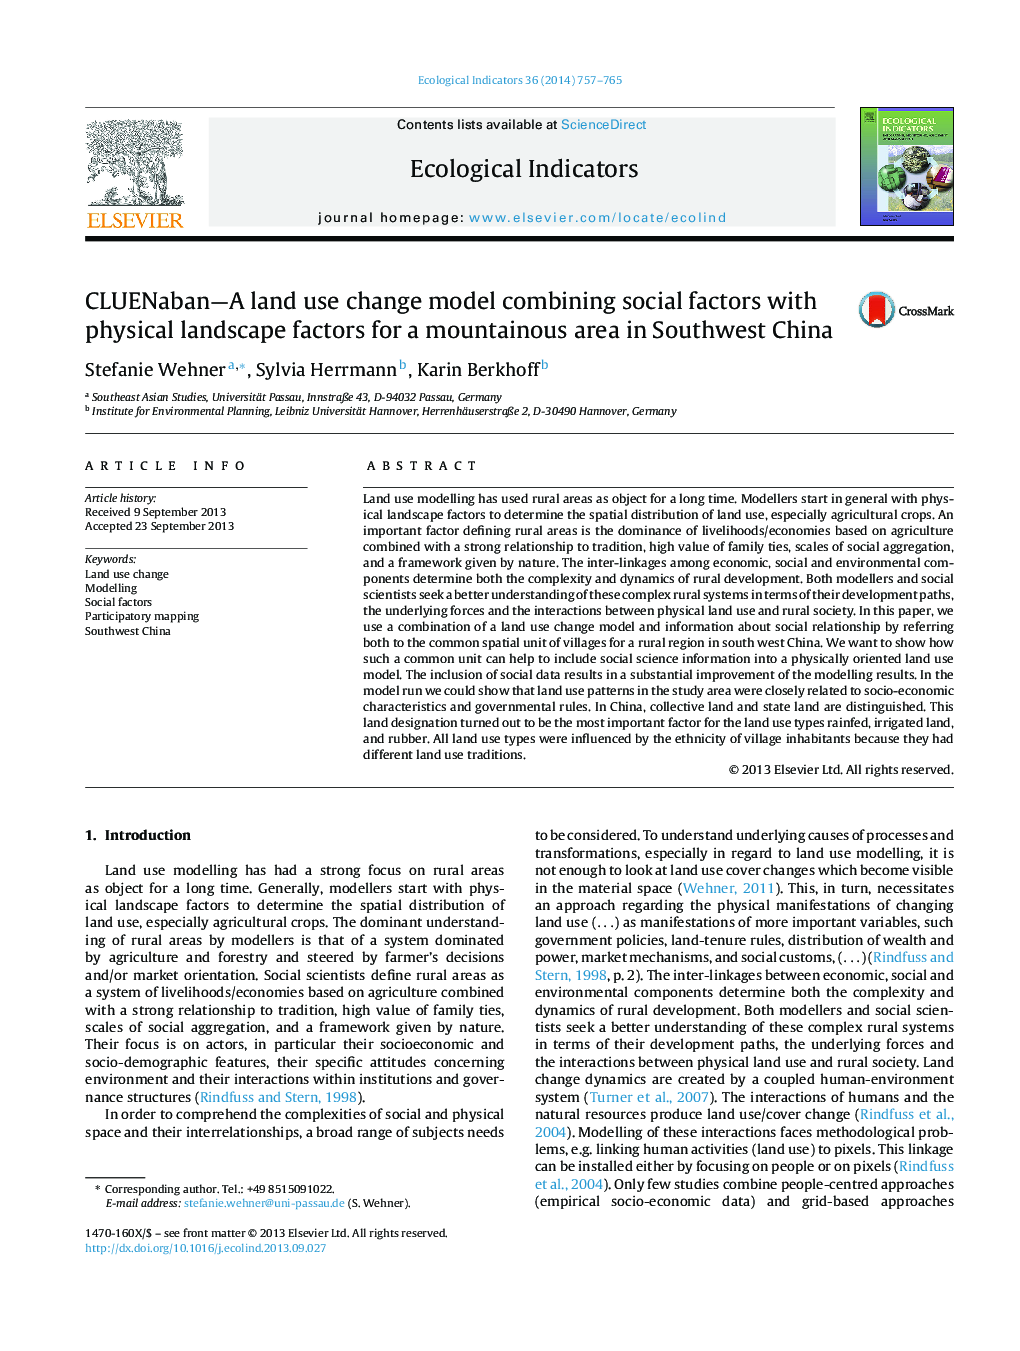 CLUENaban—A land use change model combining social factors with physical landscape factors for a mountainous area in Southwest China